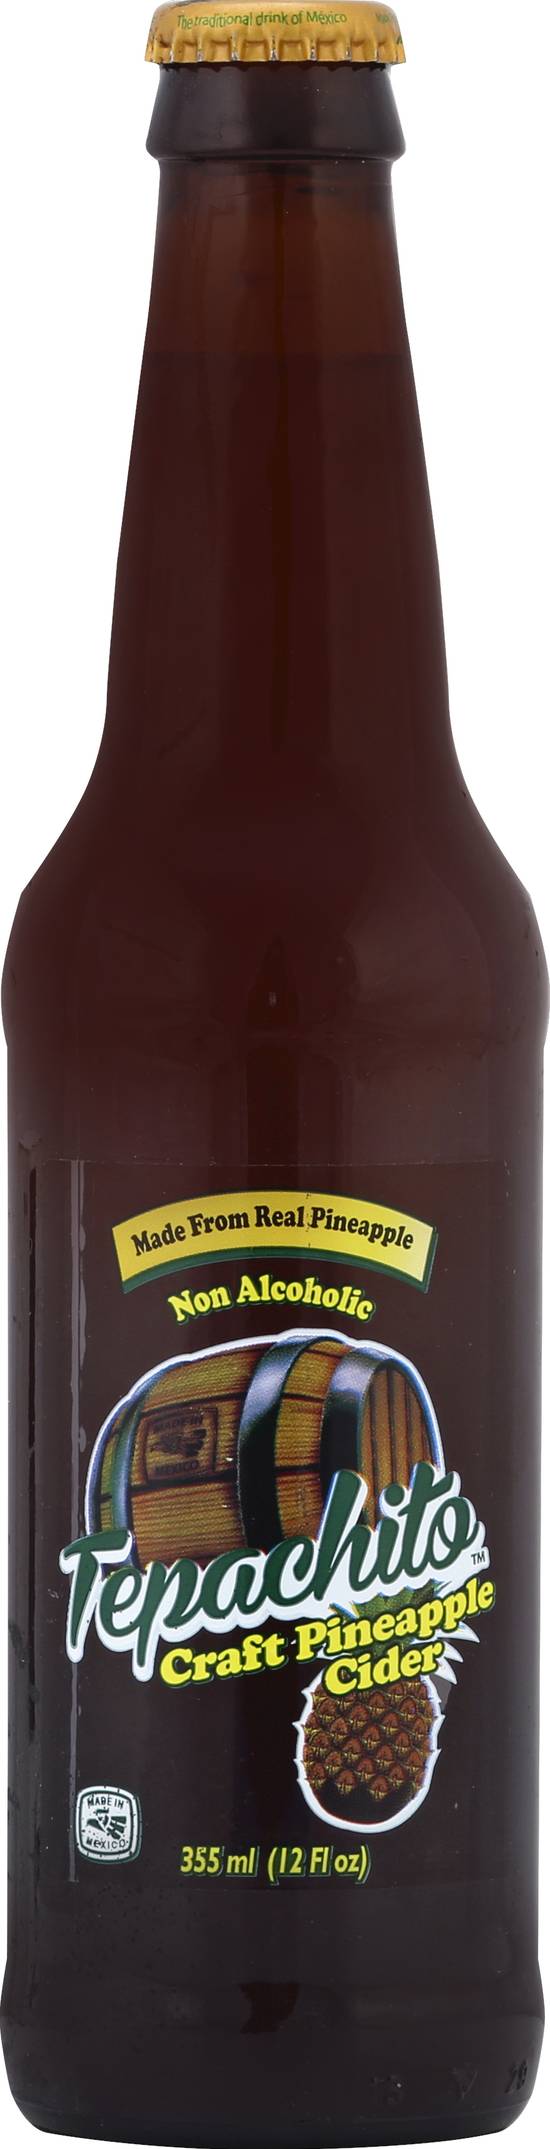 Tepachito Non Alcoholic Craft Pineapple Cider Beer (12 fl oz)